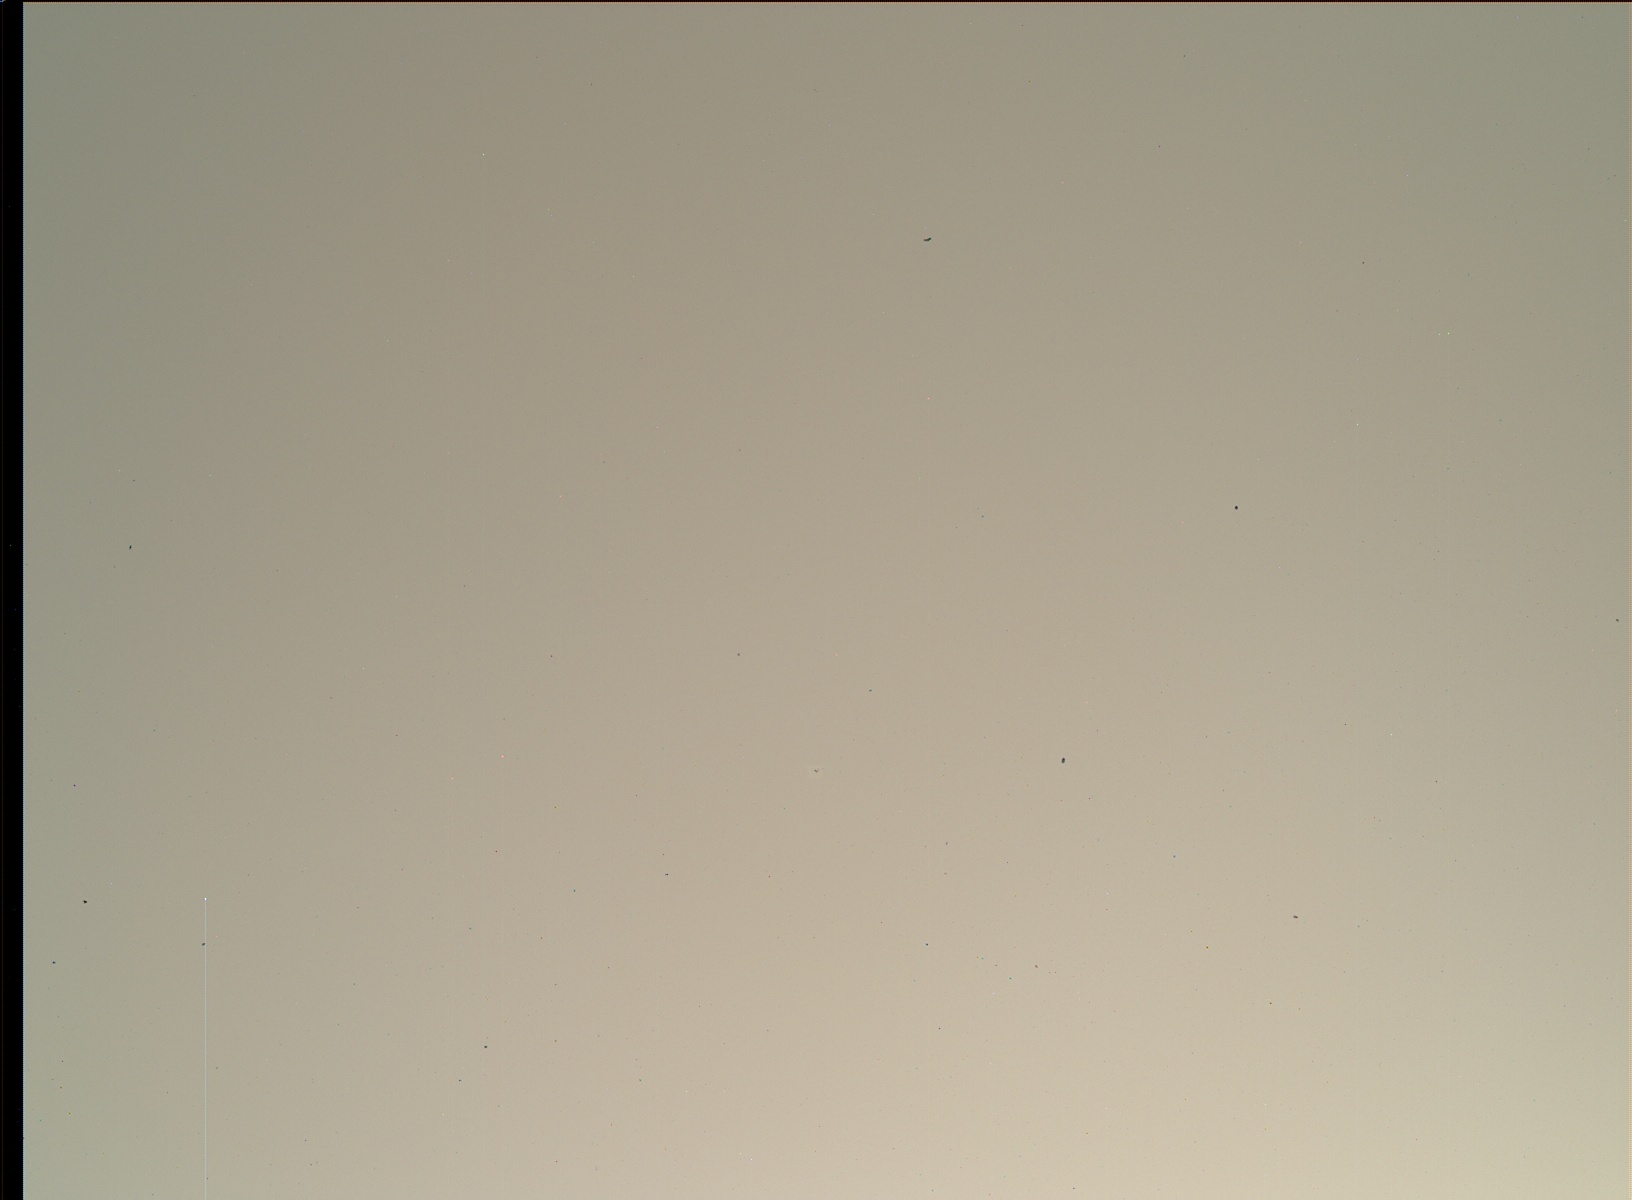 Nasa's Mars rover Curiosity acquired this image using its Mars Hand Lens Imager (MAHLI) on Sol 3315